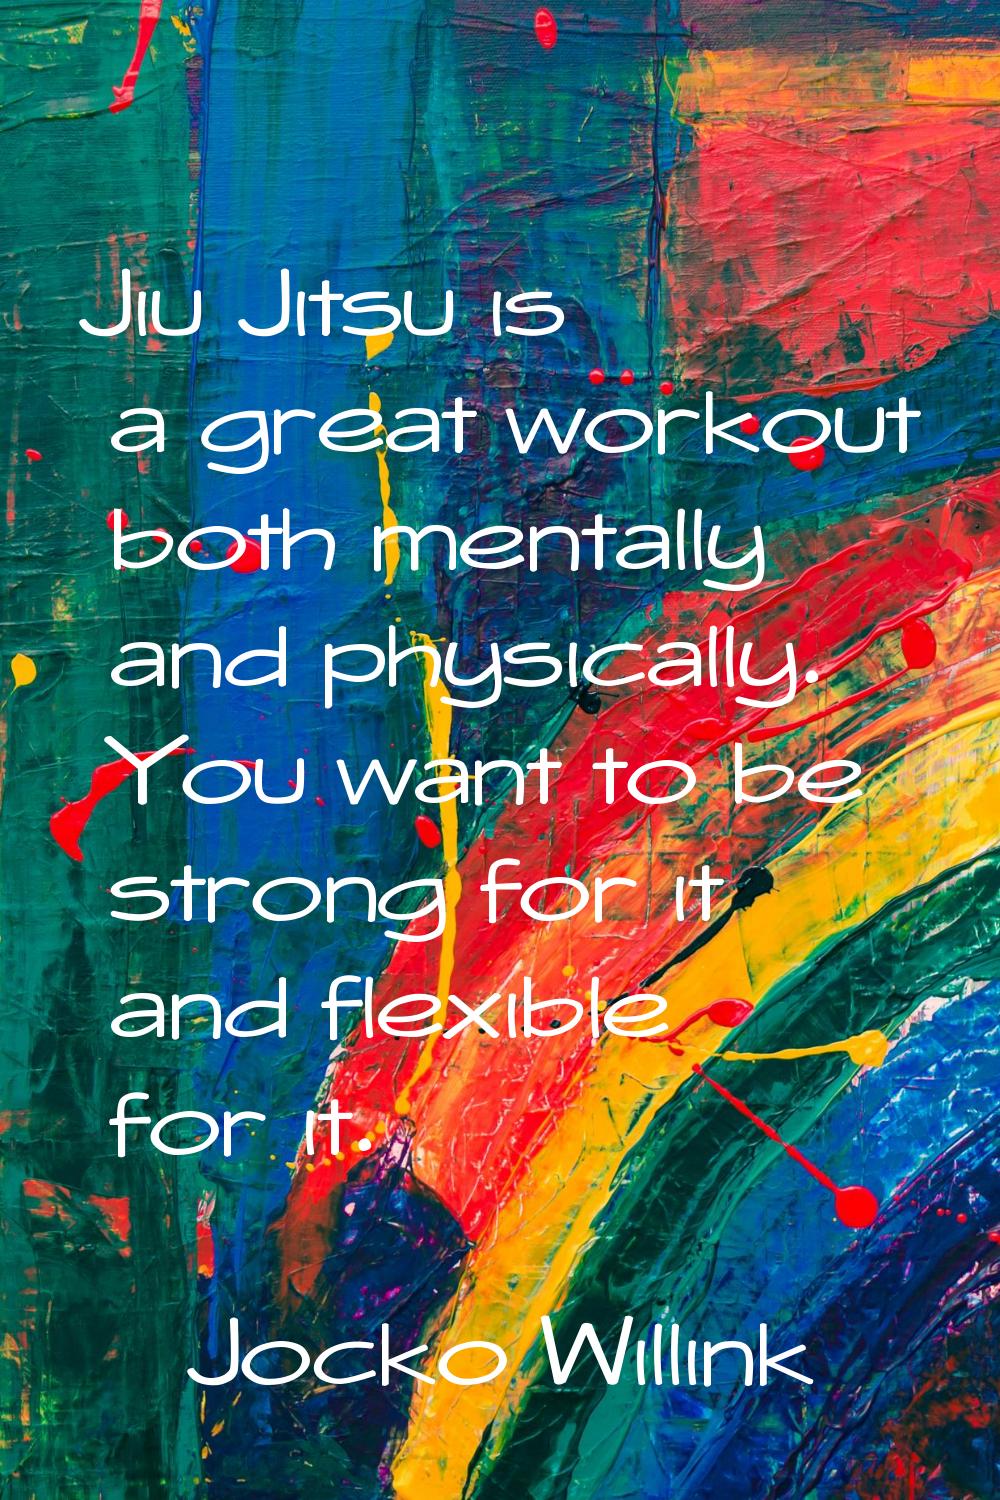 Jiu Jitsu is a great workout both mentally and physically. You want to be strong for it and flexibl